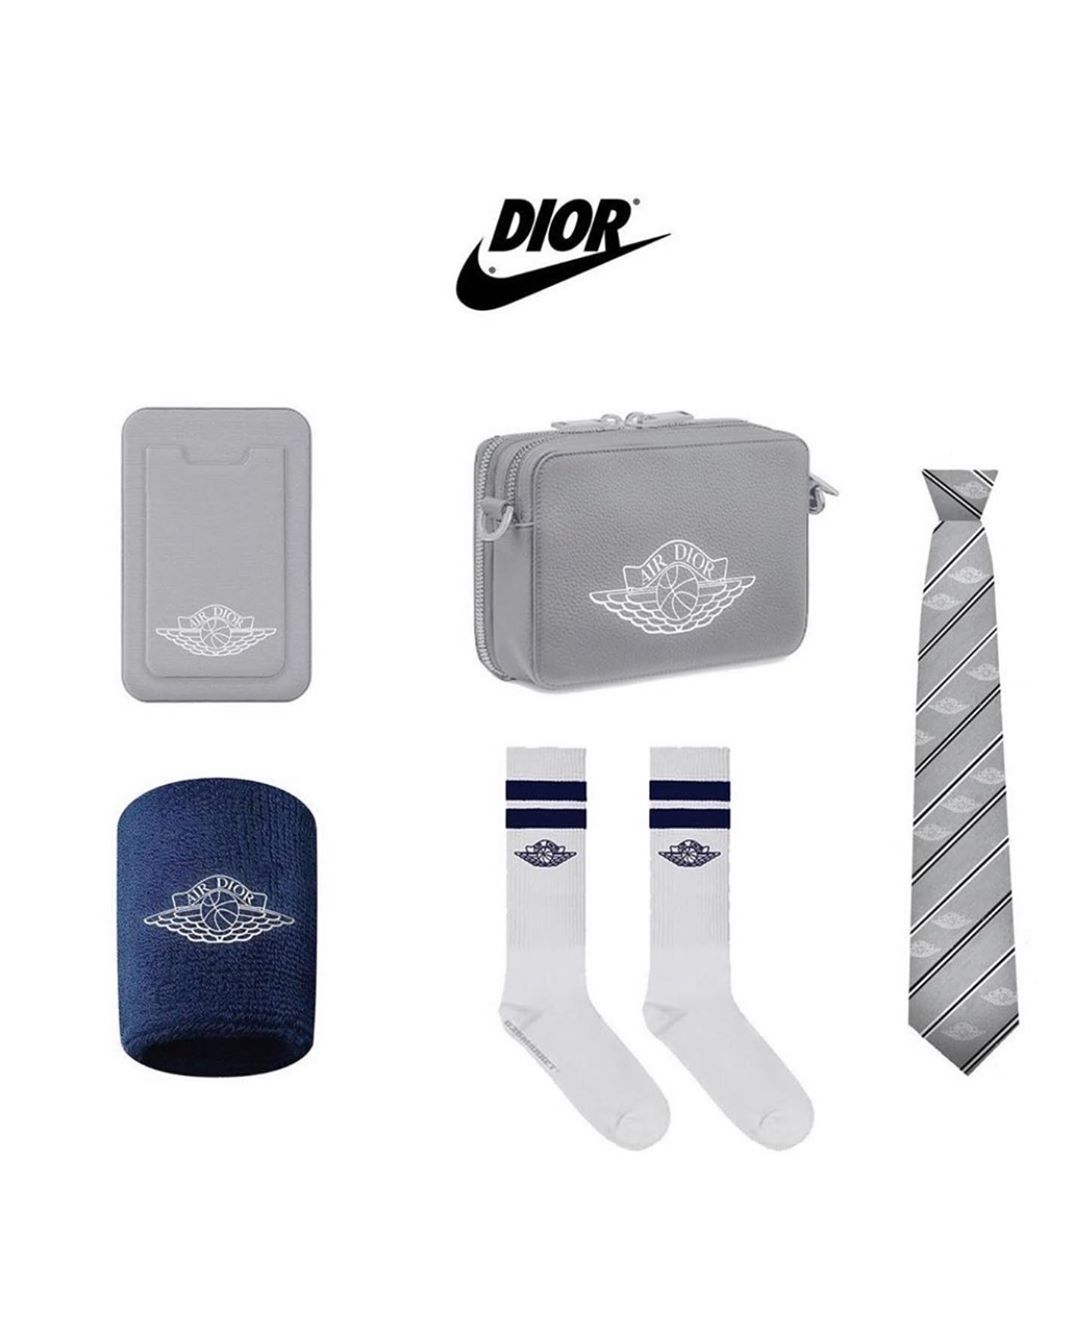 The Jordan x Dior “Air Dior” Collection is Coming Soon